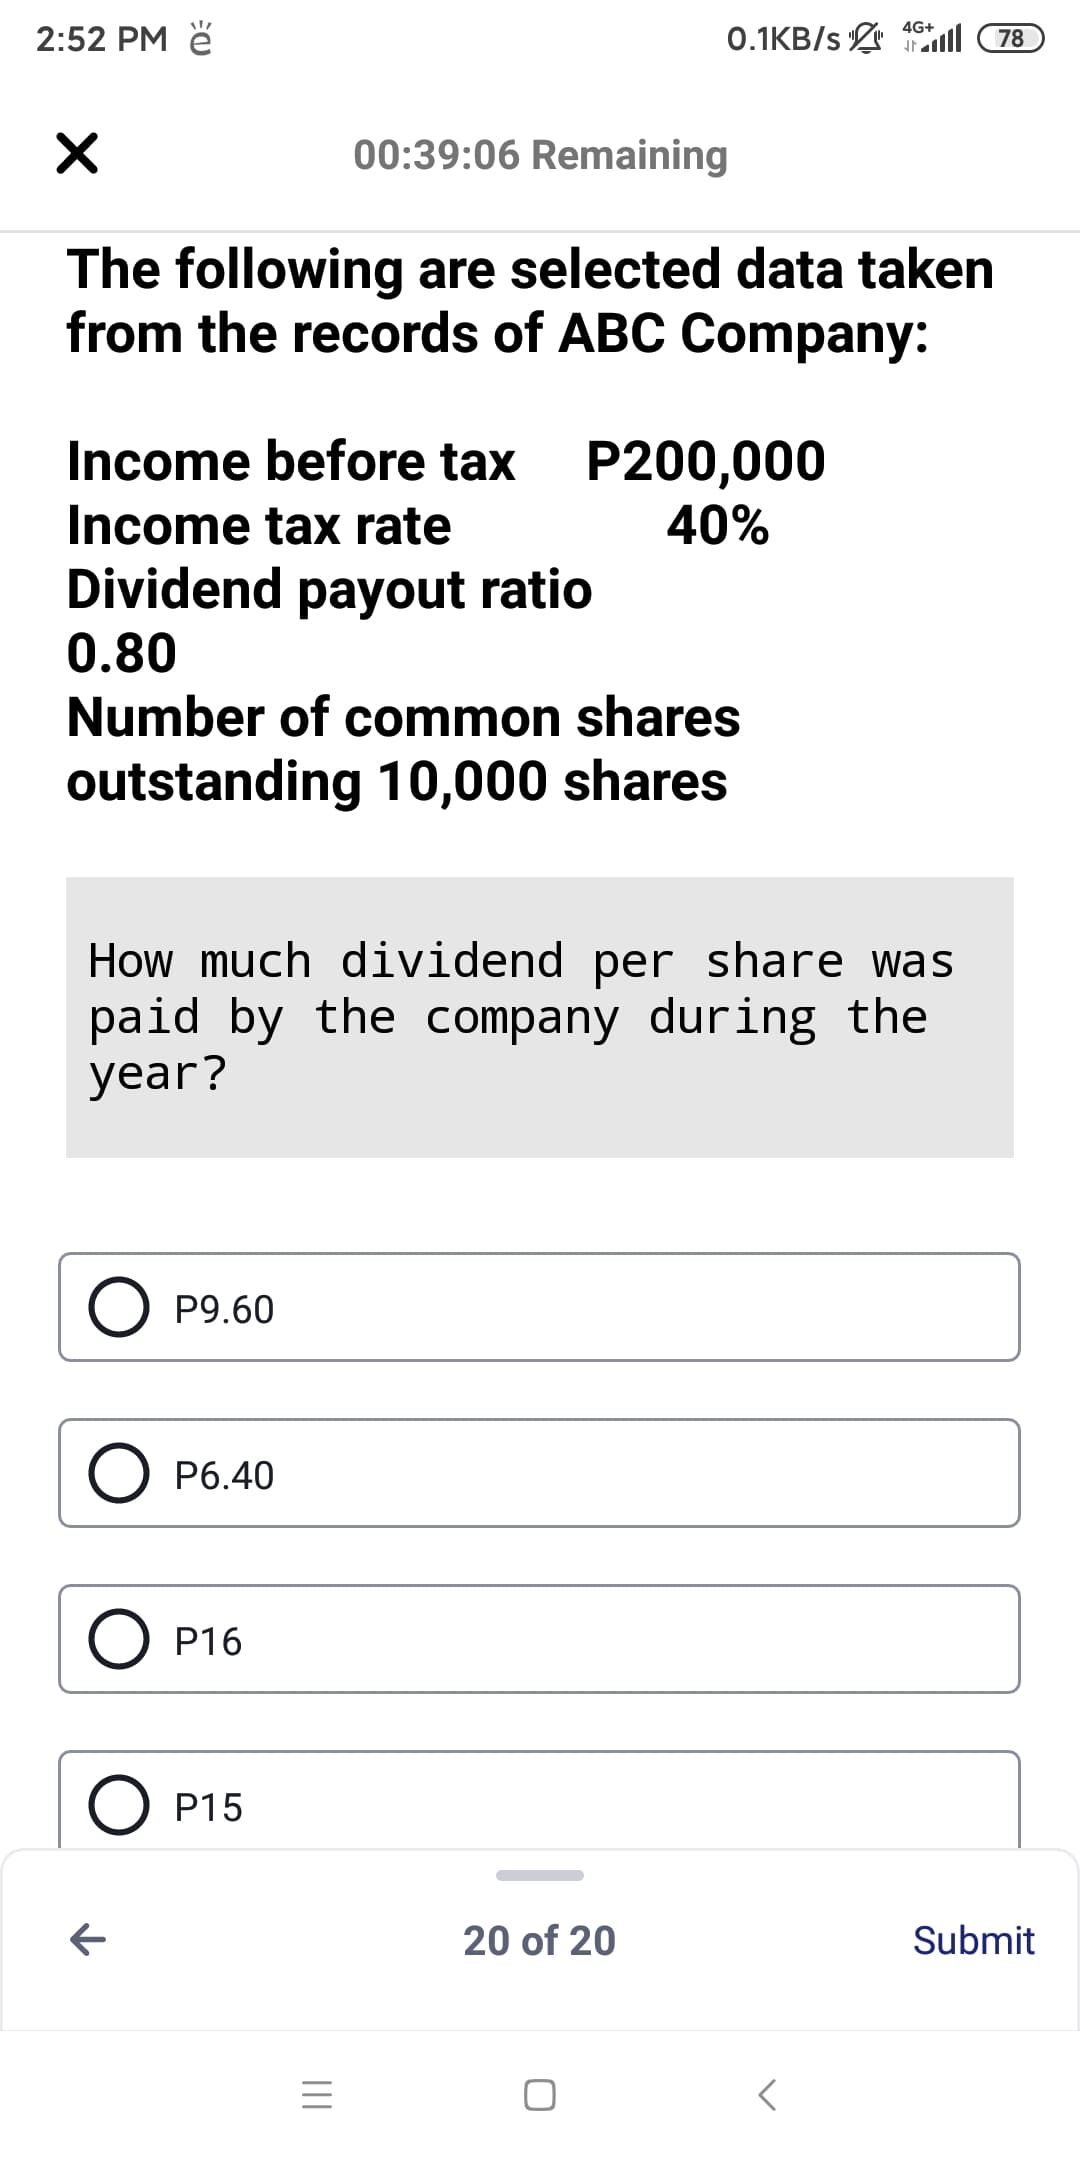 4G+
2:52 PM ě
0.1KB/s ll
78
00:39:06 Remaining
The following are selected data taken
from the records of ABC Company:
Income before tax
P200,000
40%
Income tax rate
Dividend payout ratio
0.80
Number of common shares
outstanding 10,000 shares
How much dividend per share was
paid by the company during the
year?
P9.60
O P6.40
O P16
O P15
20 of 20
Submit
